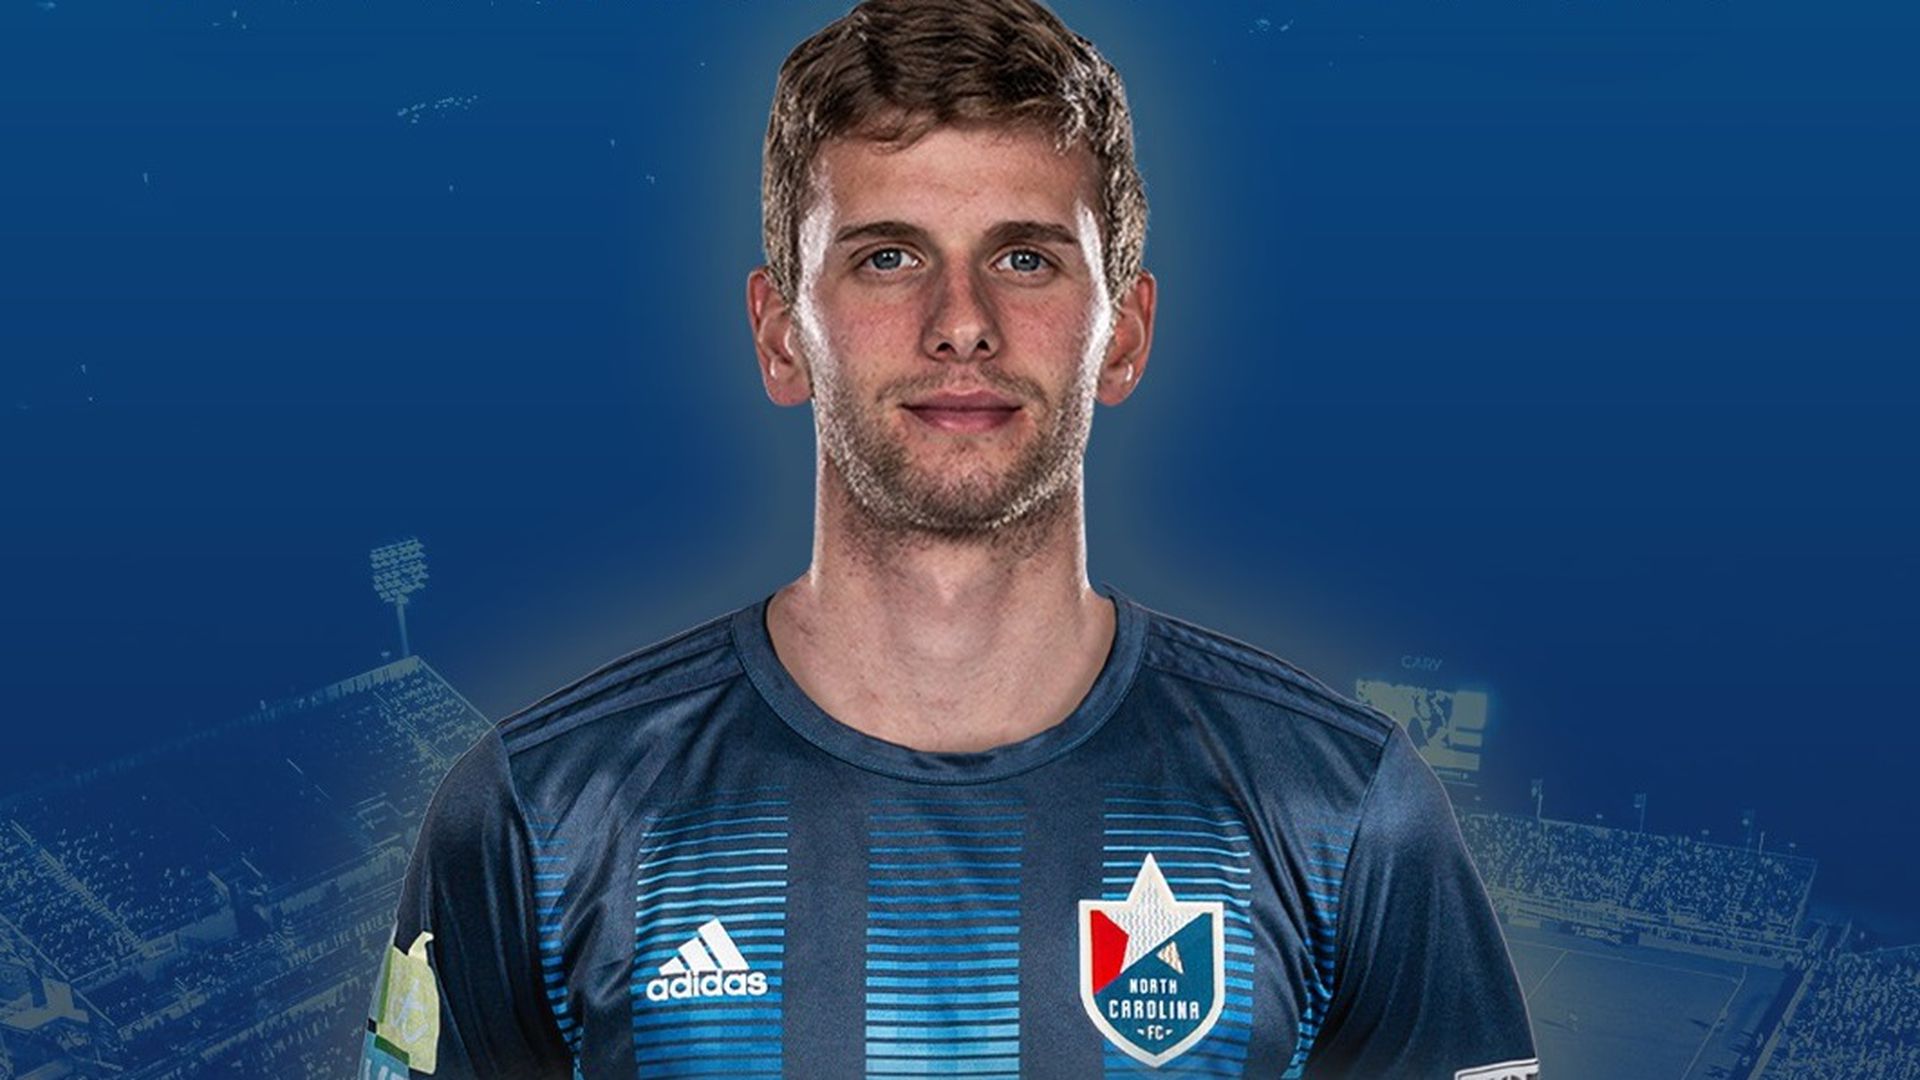 out gay footballer collin martin joins north carolina fc - and his boyfriend’s moving too